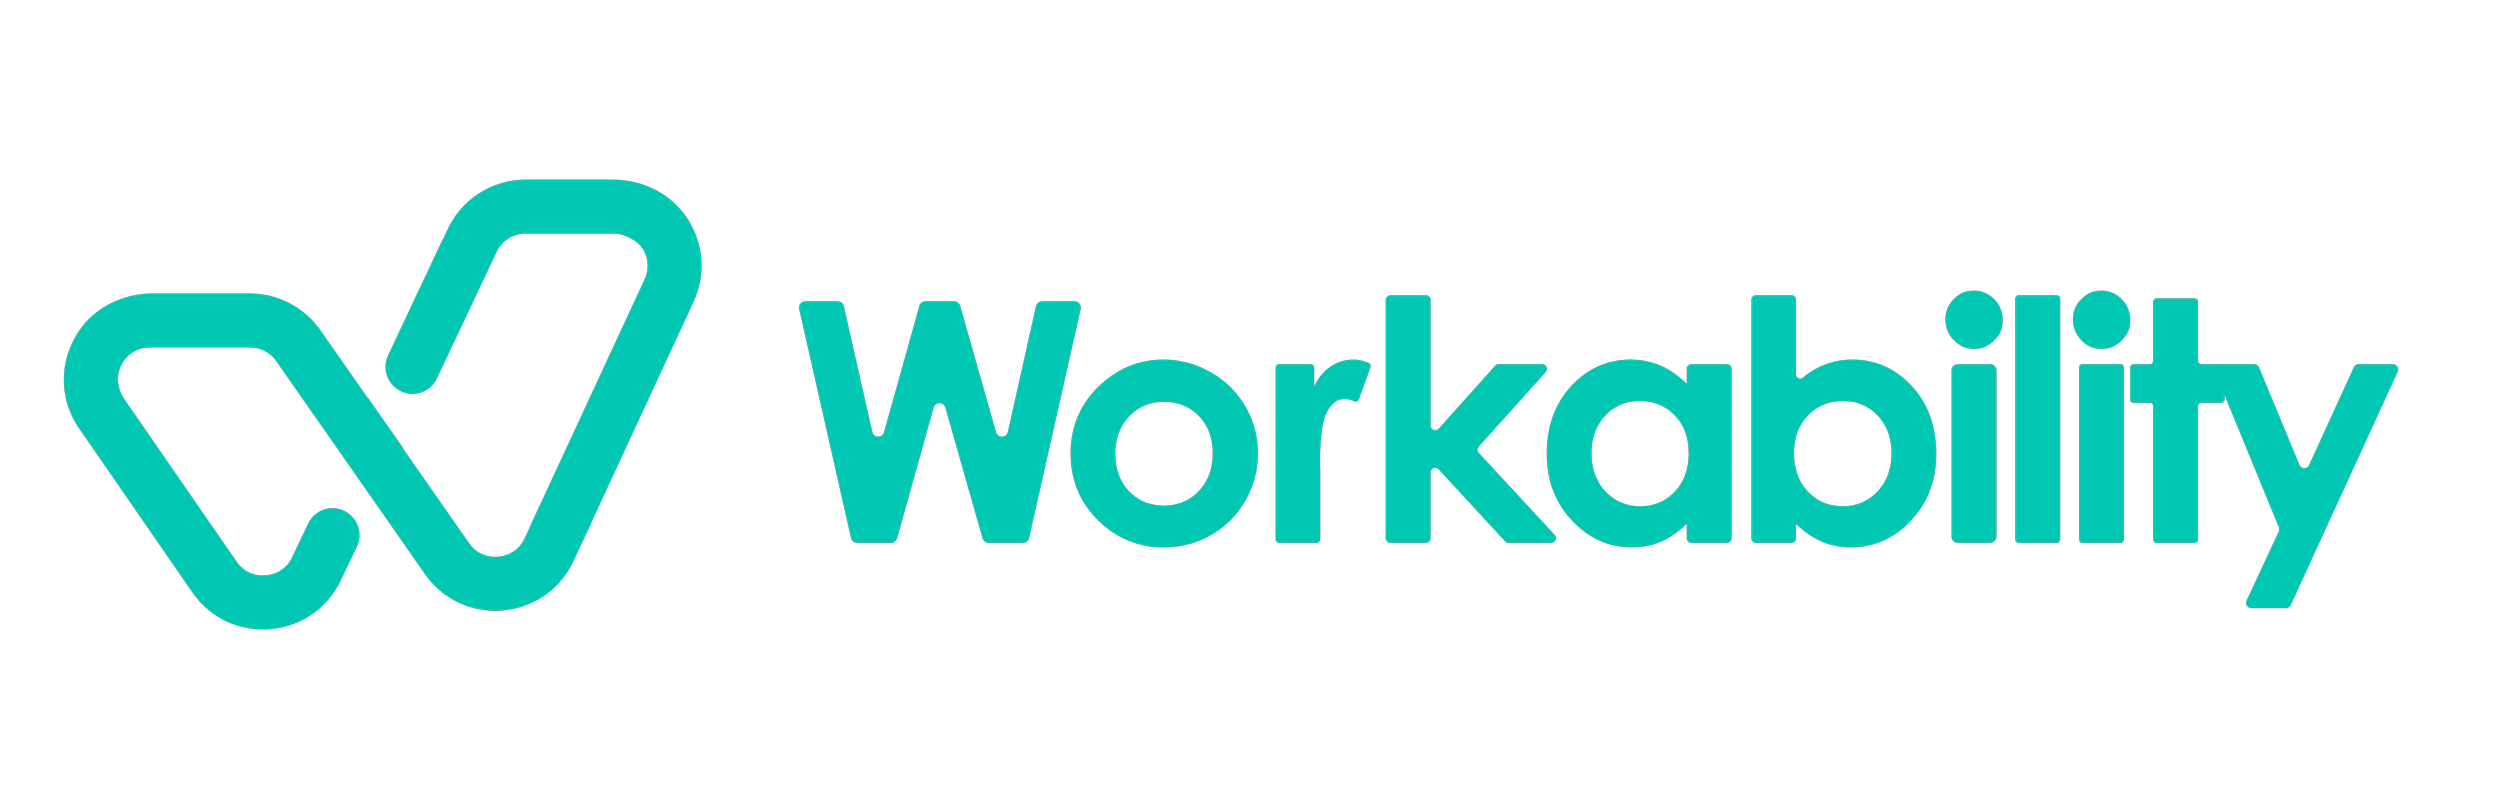 workability-logo-.png